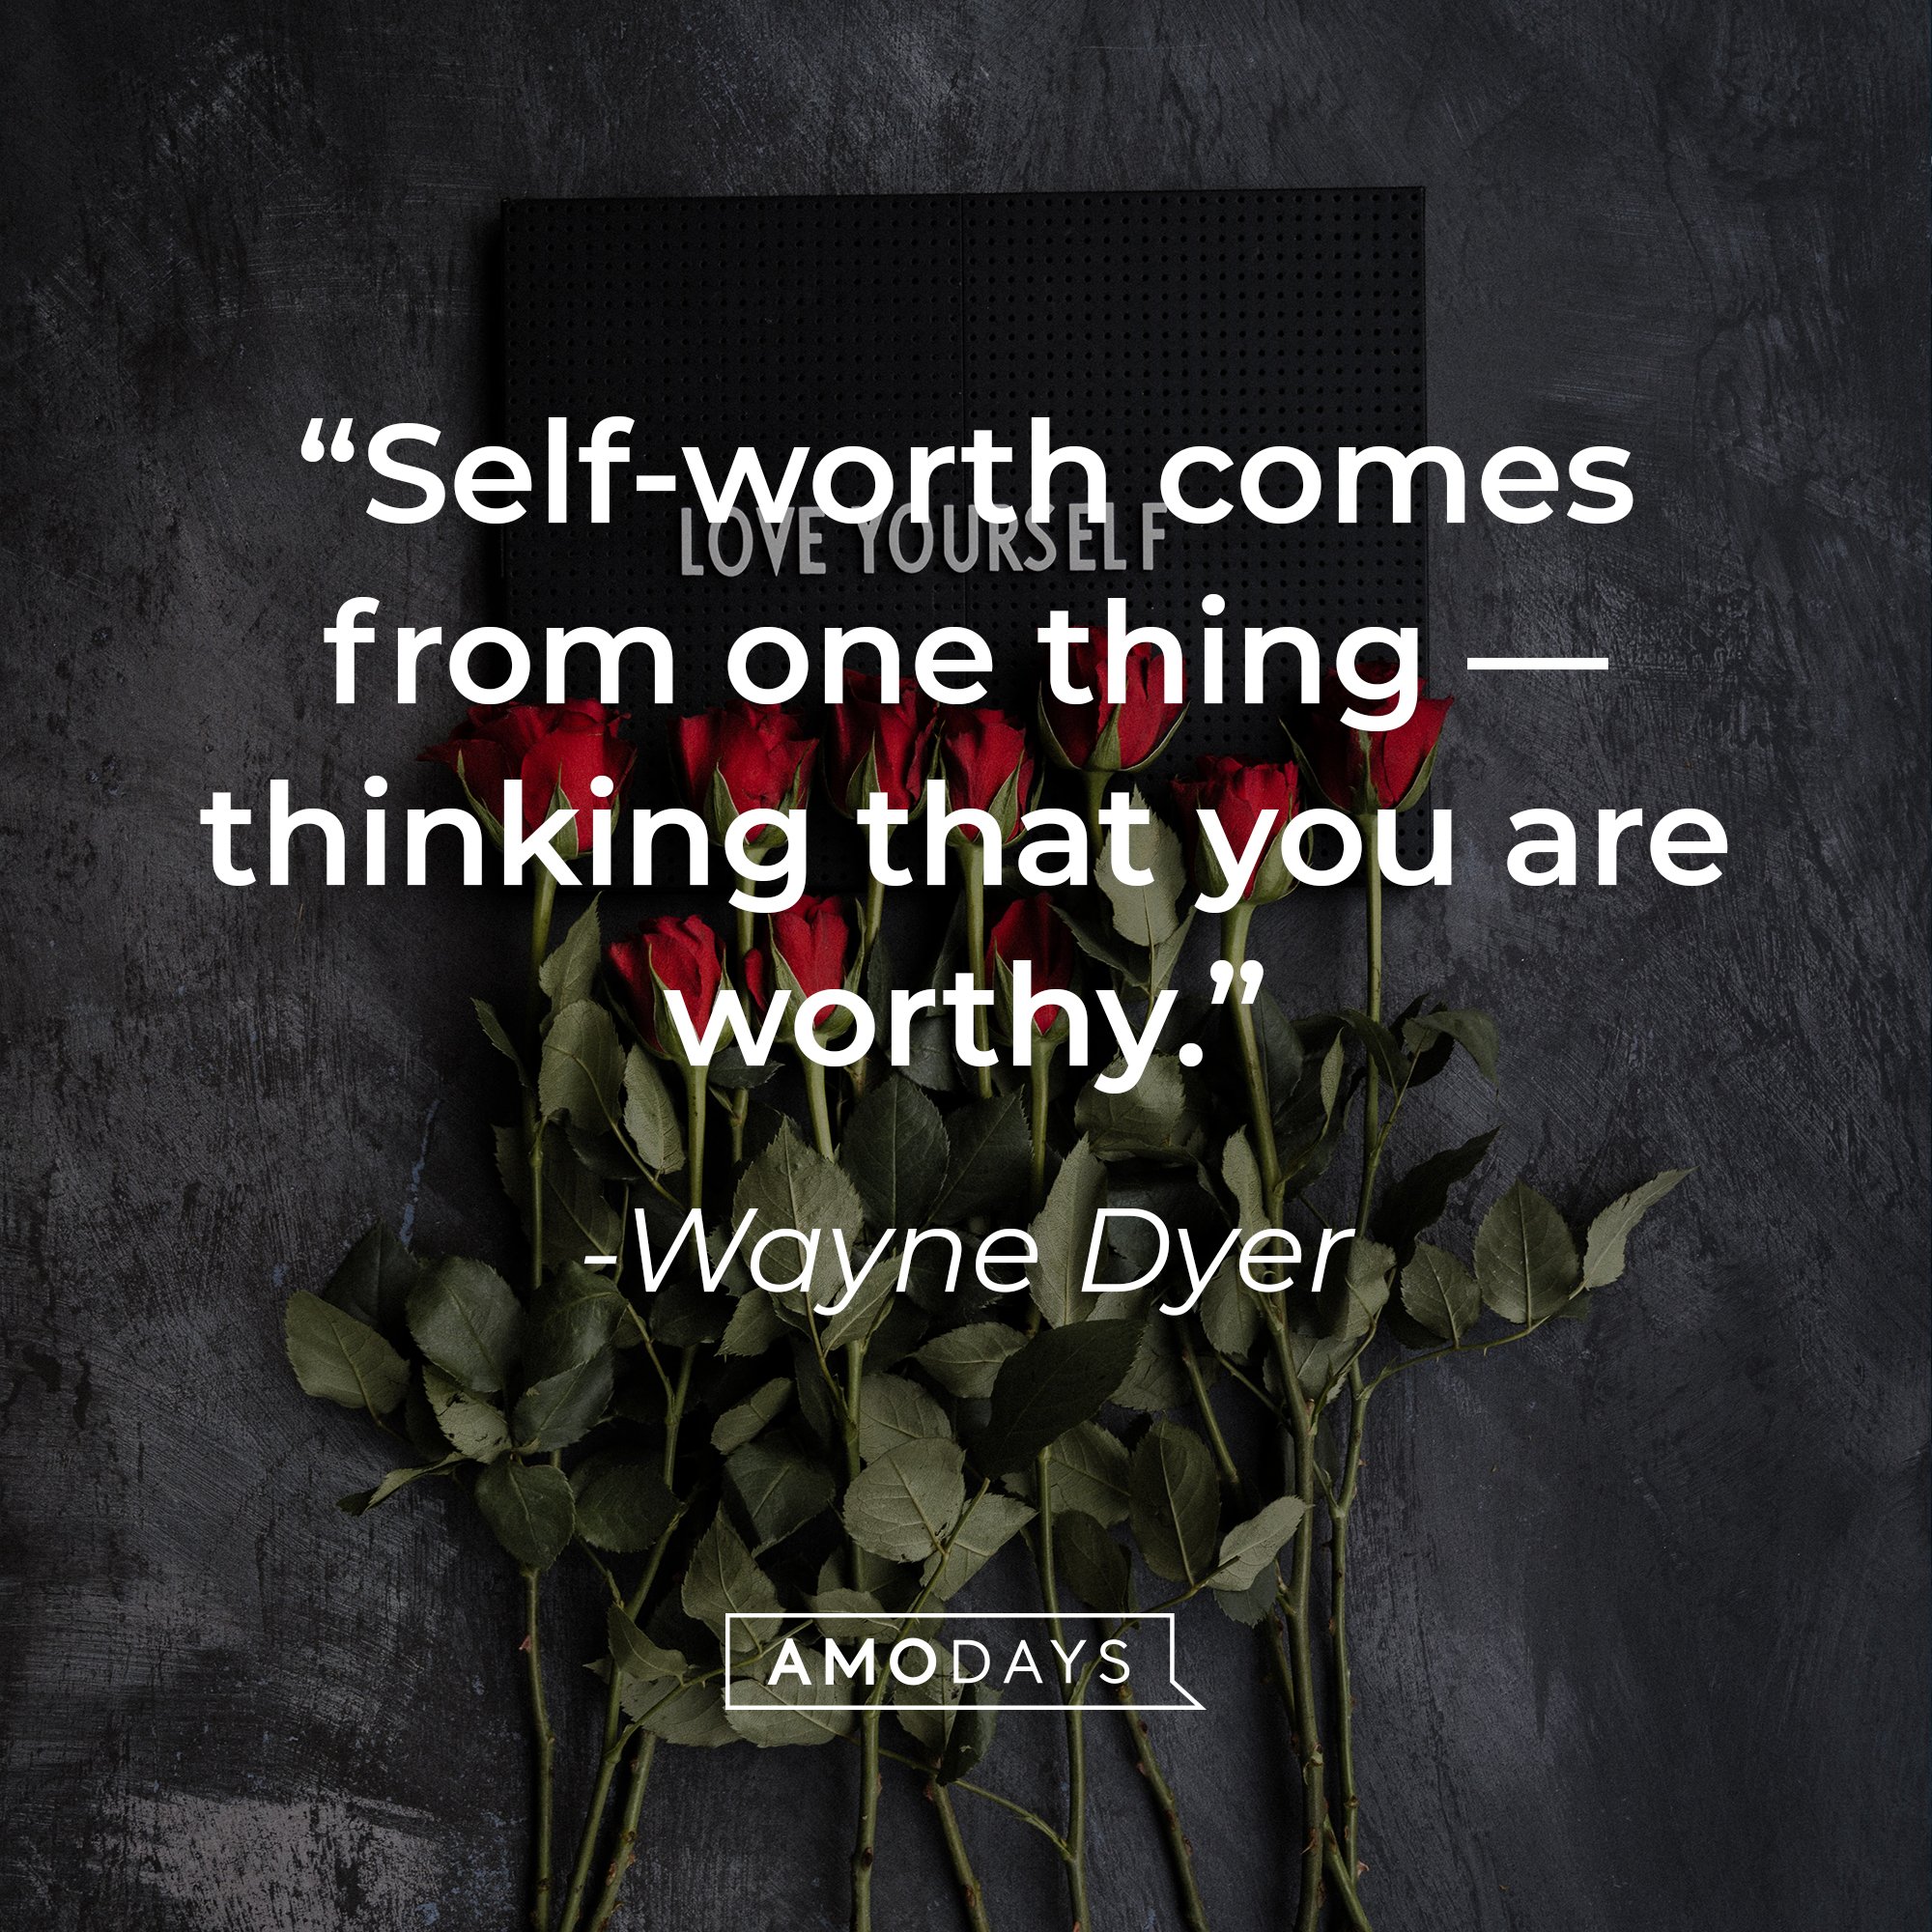 Wayne Dyer's quote: “Self-worth comes from one thing — thinking that you are worthy.” | Image: AmoDays